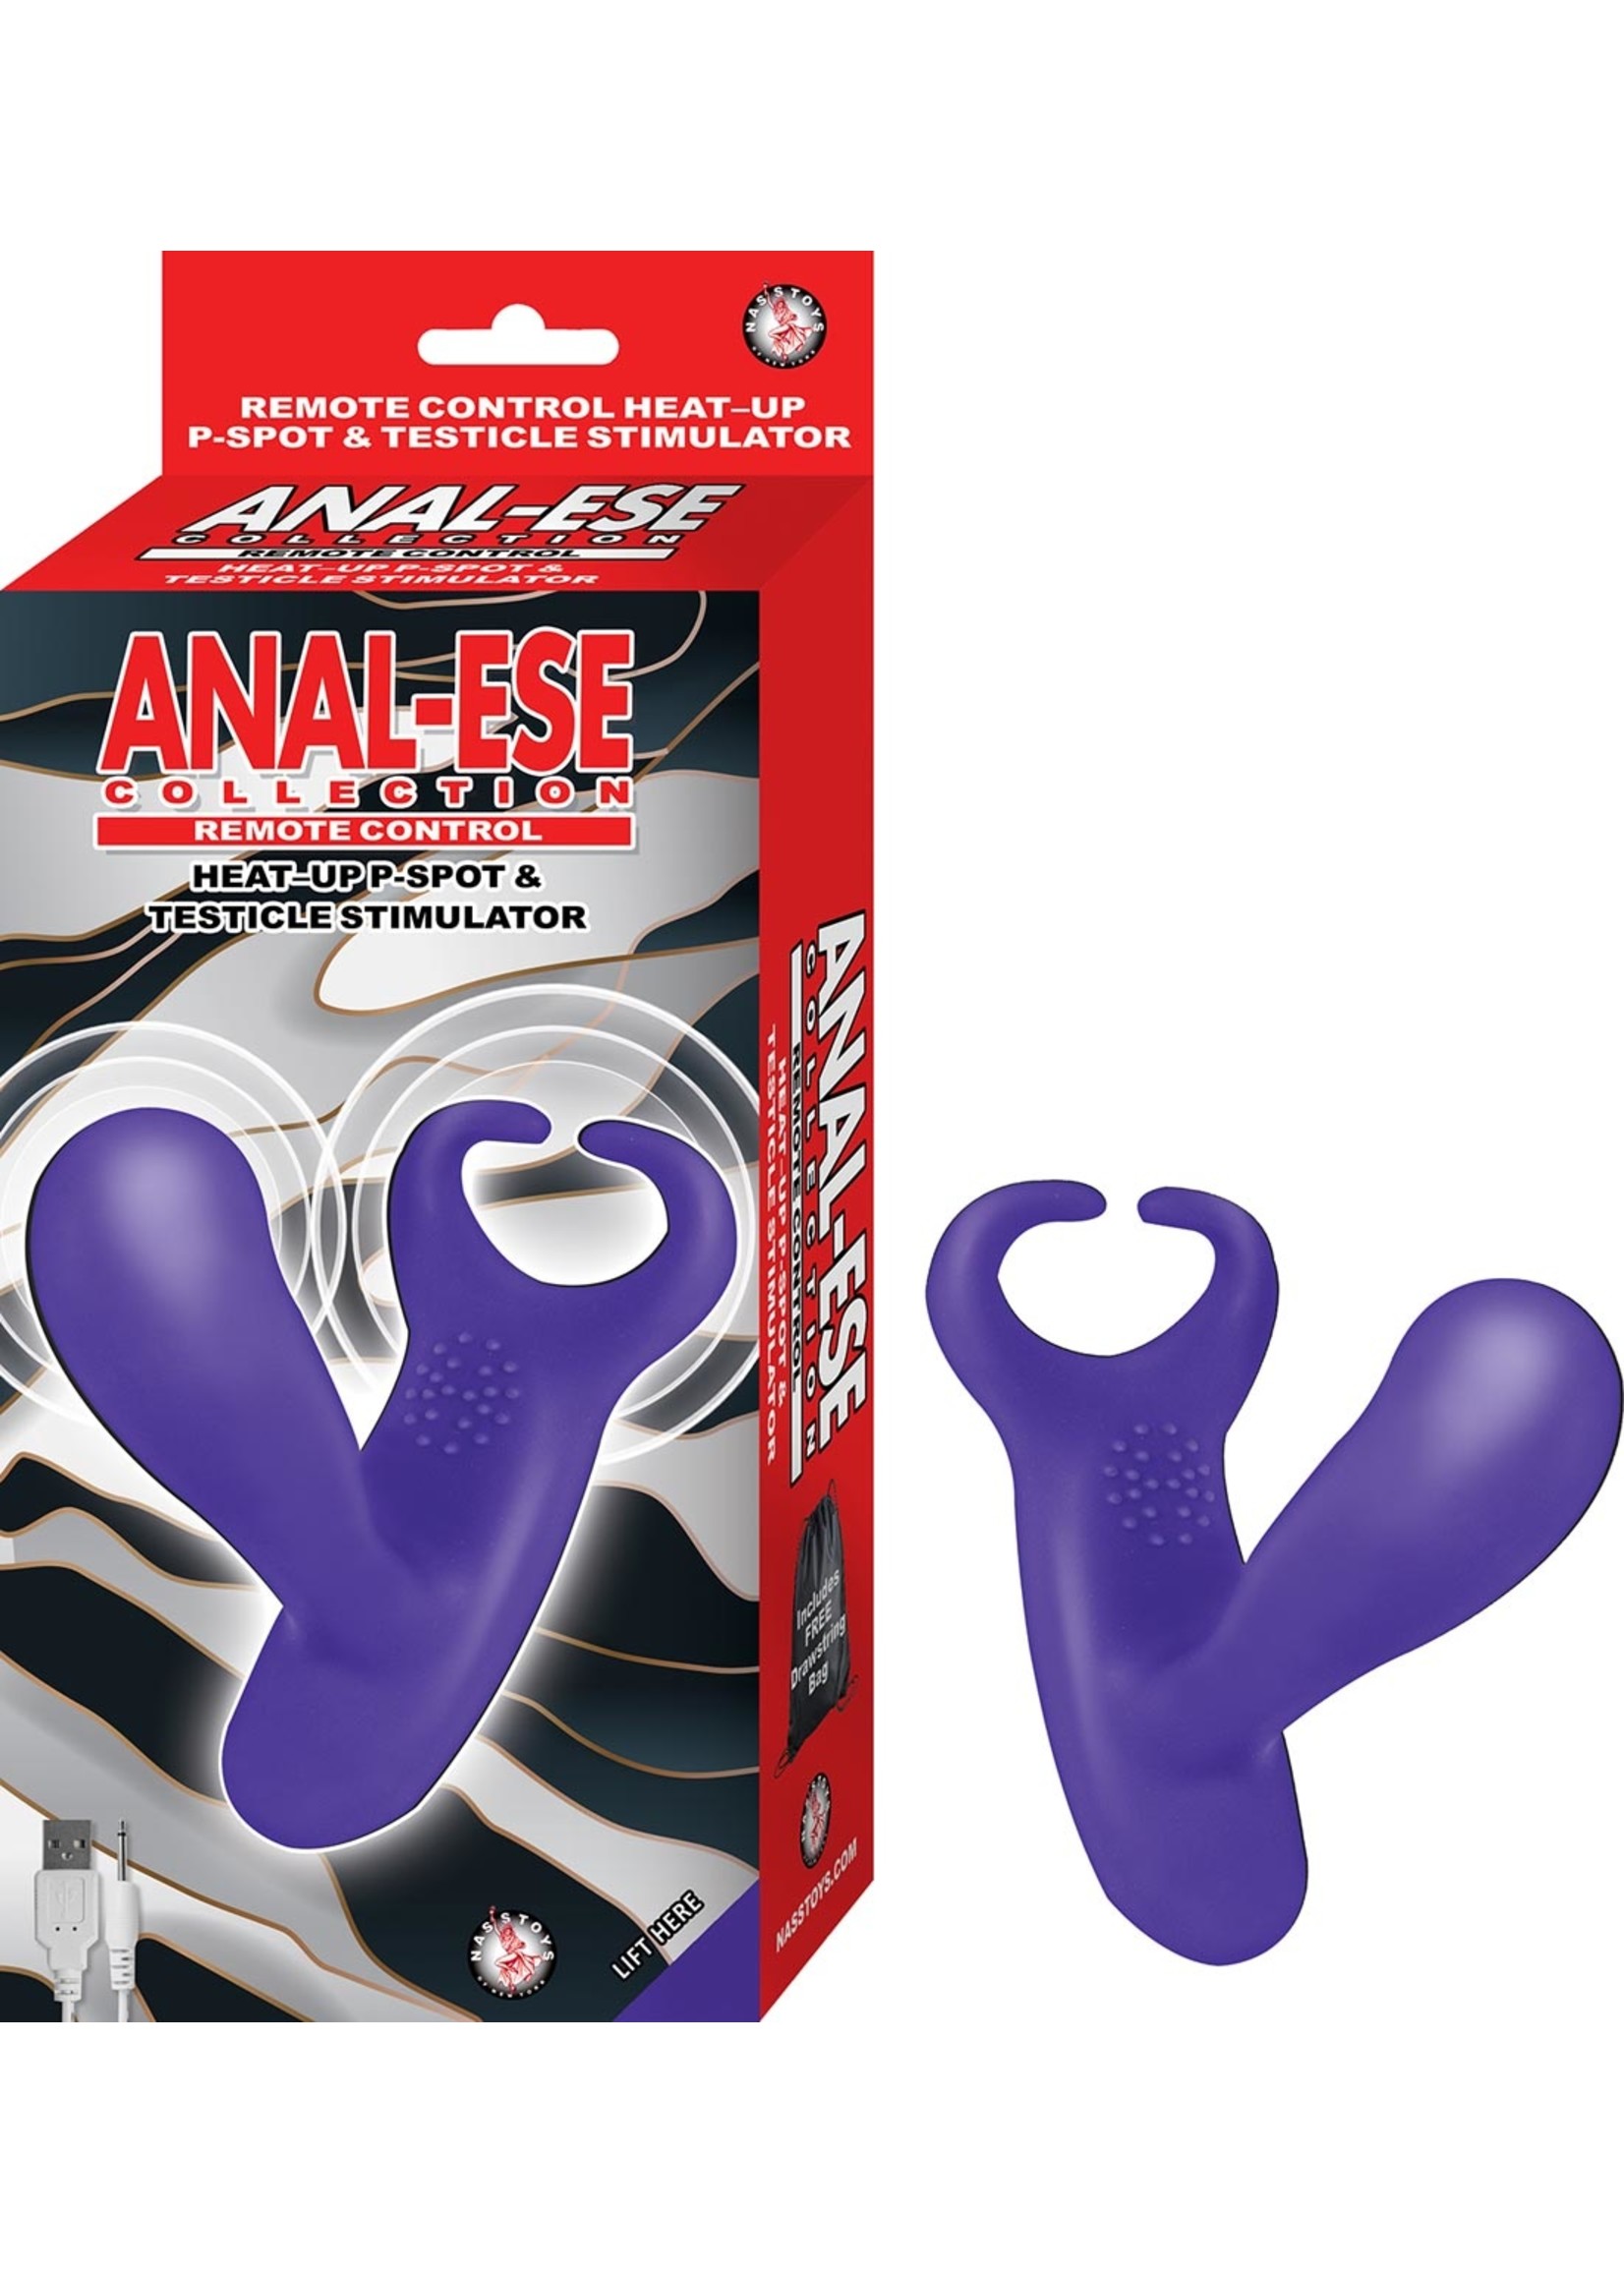 Nasstoys Anal-Ese Remote Control Heat-Up P-Spot & Testicle Stimulator